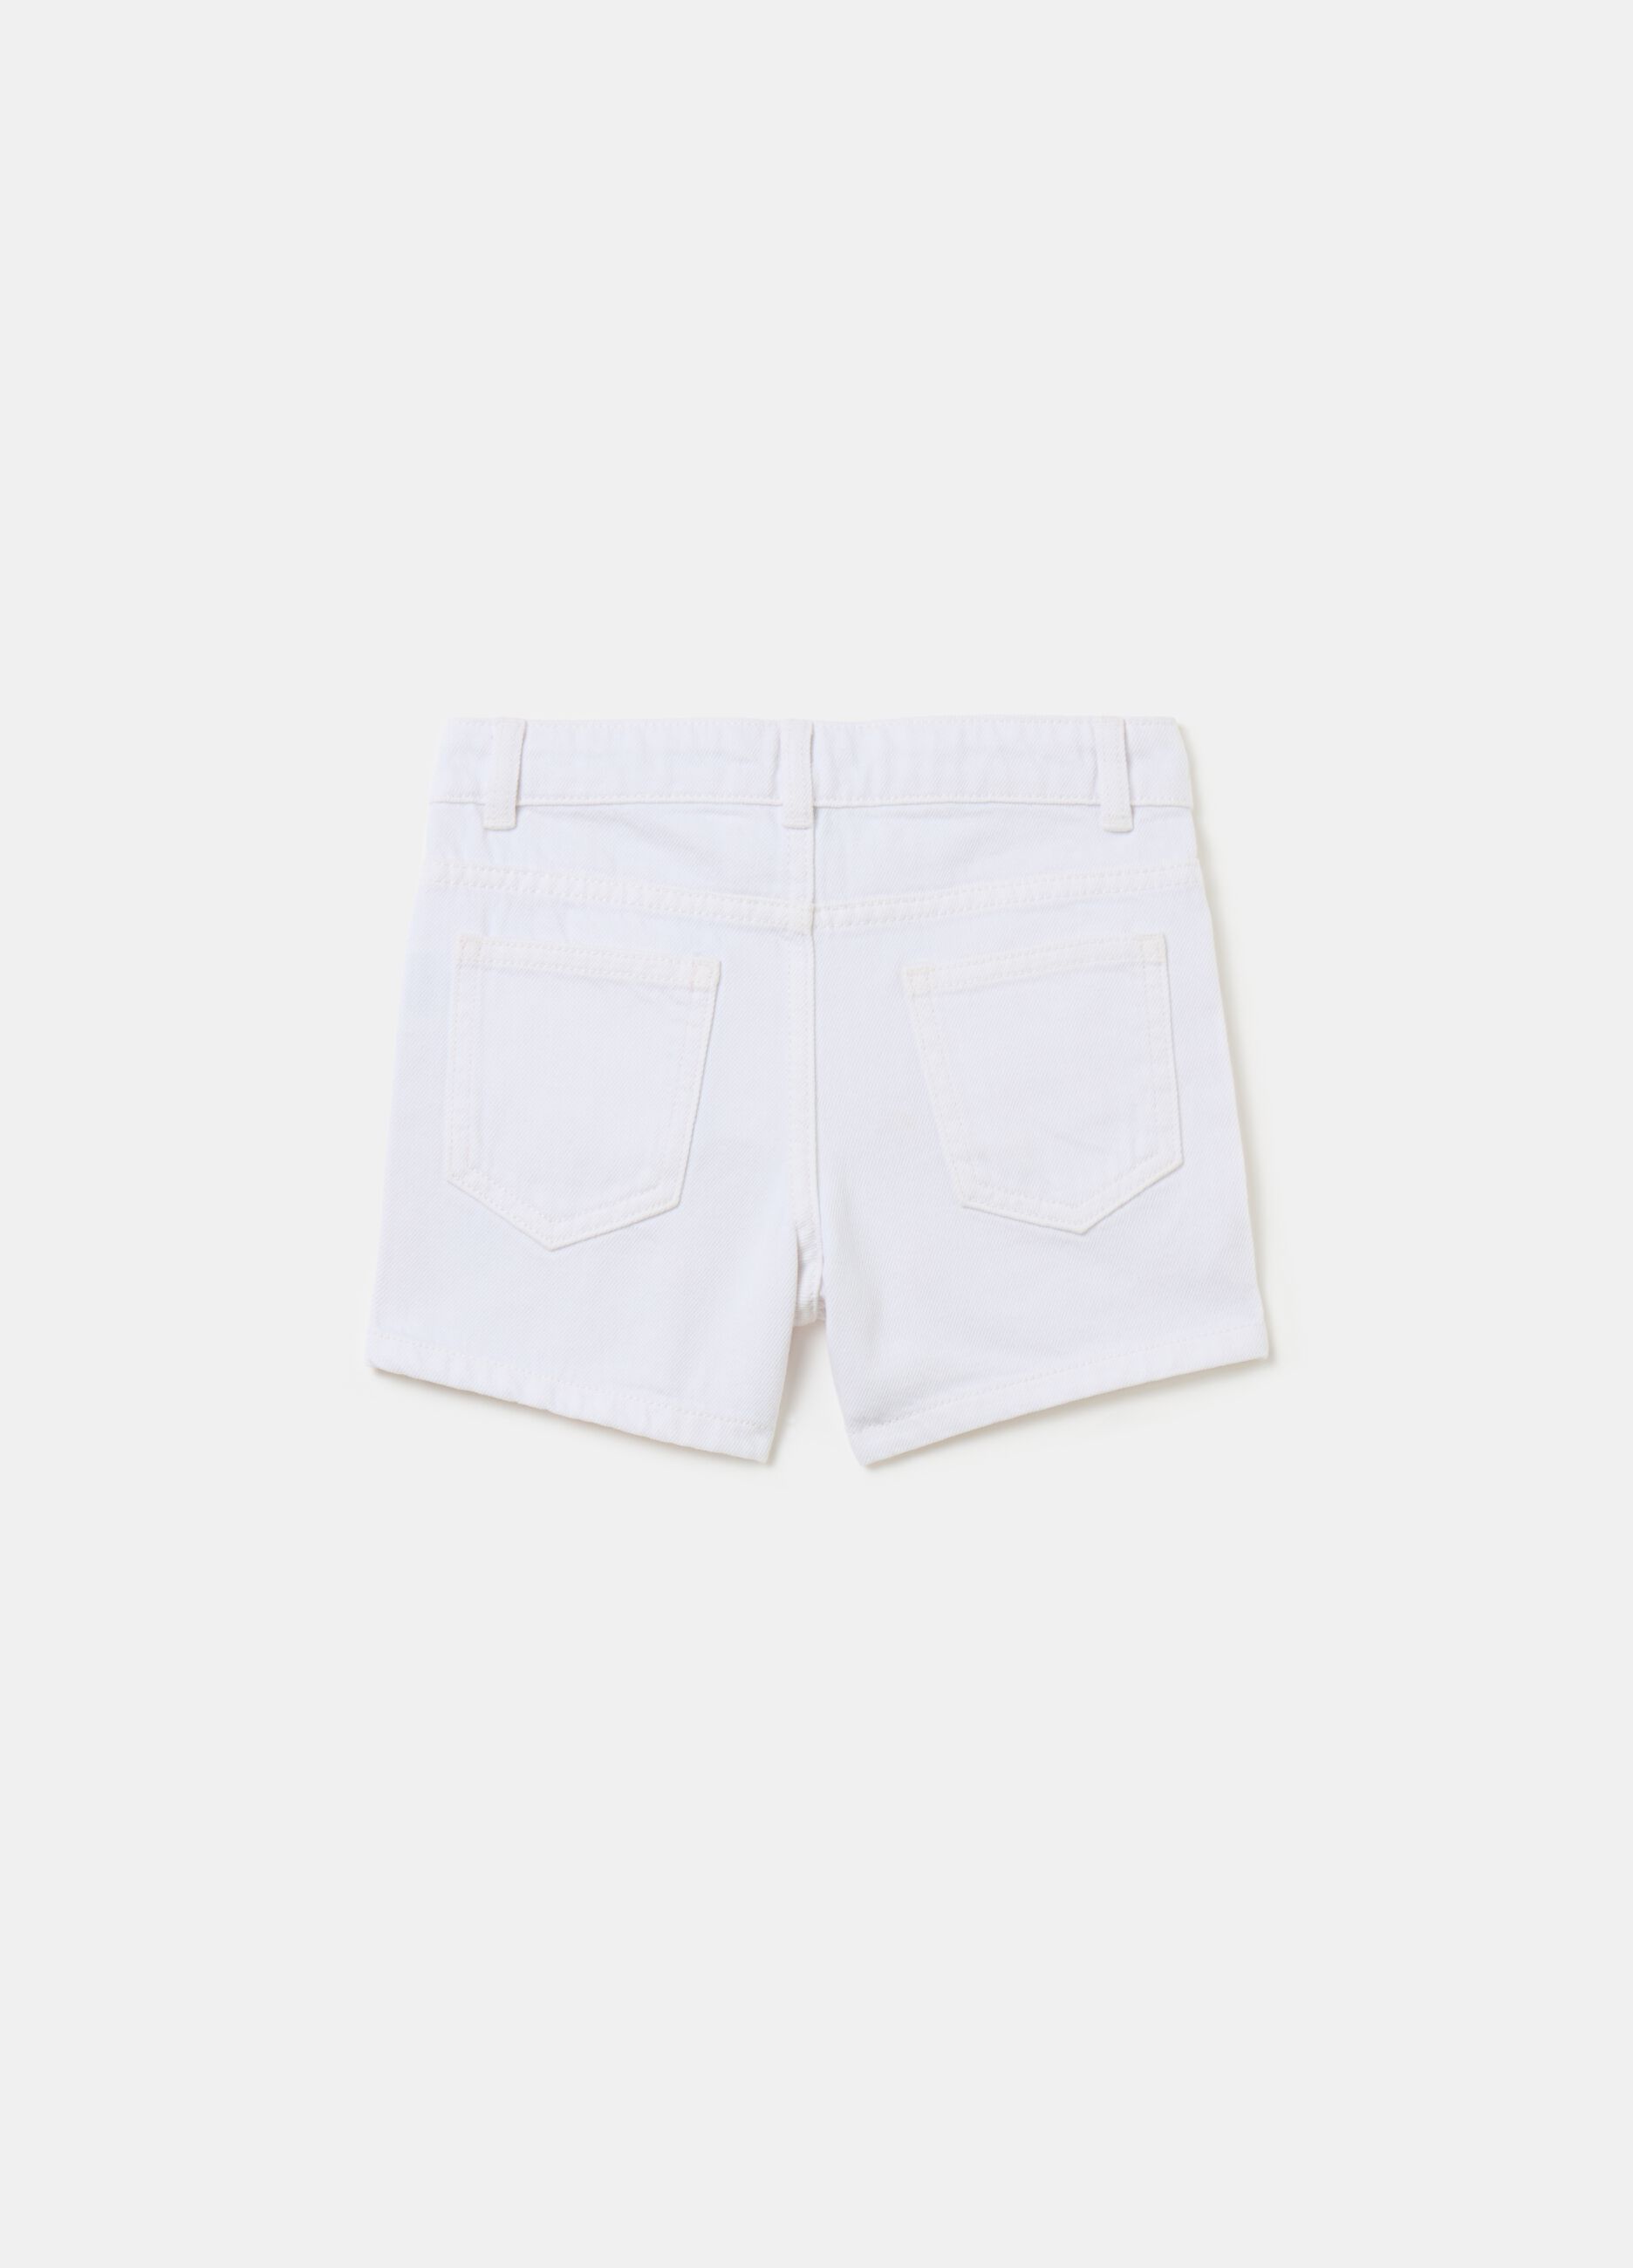 Cotton shorts with floral embroidery